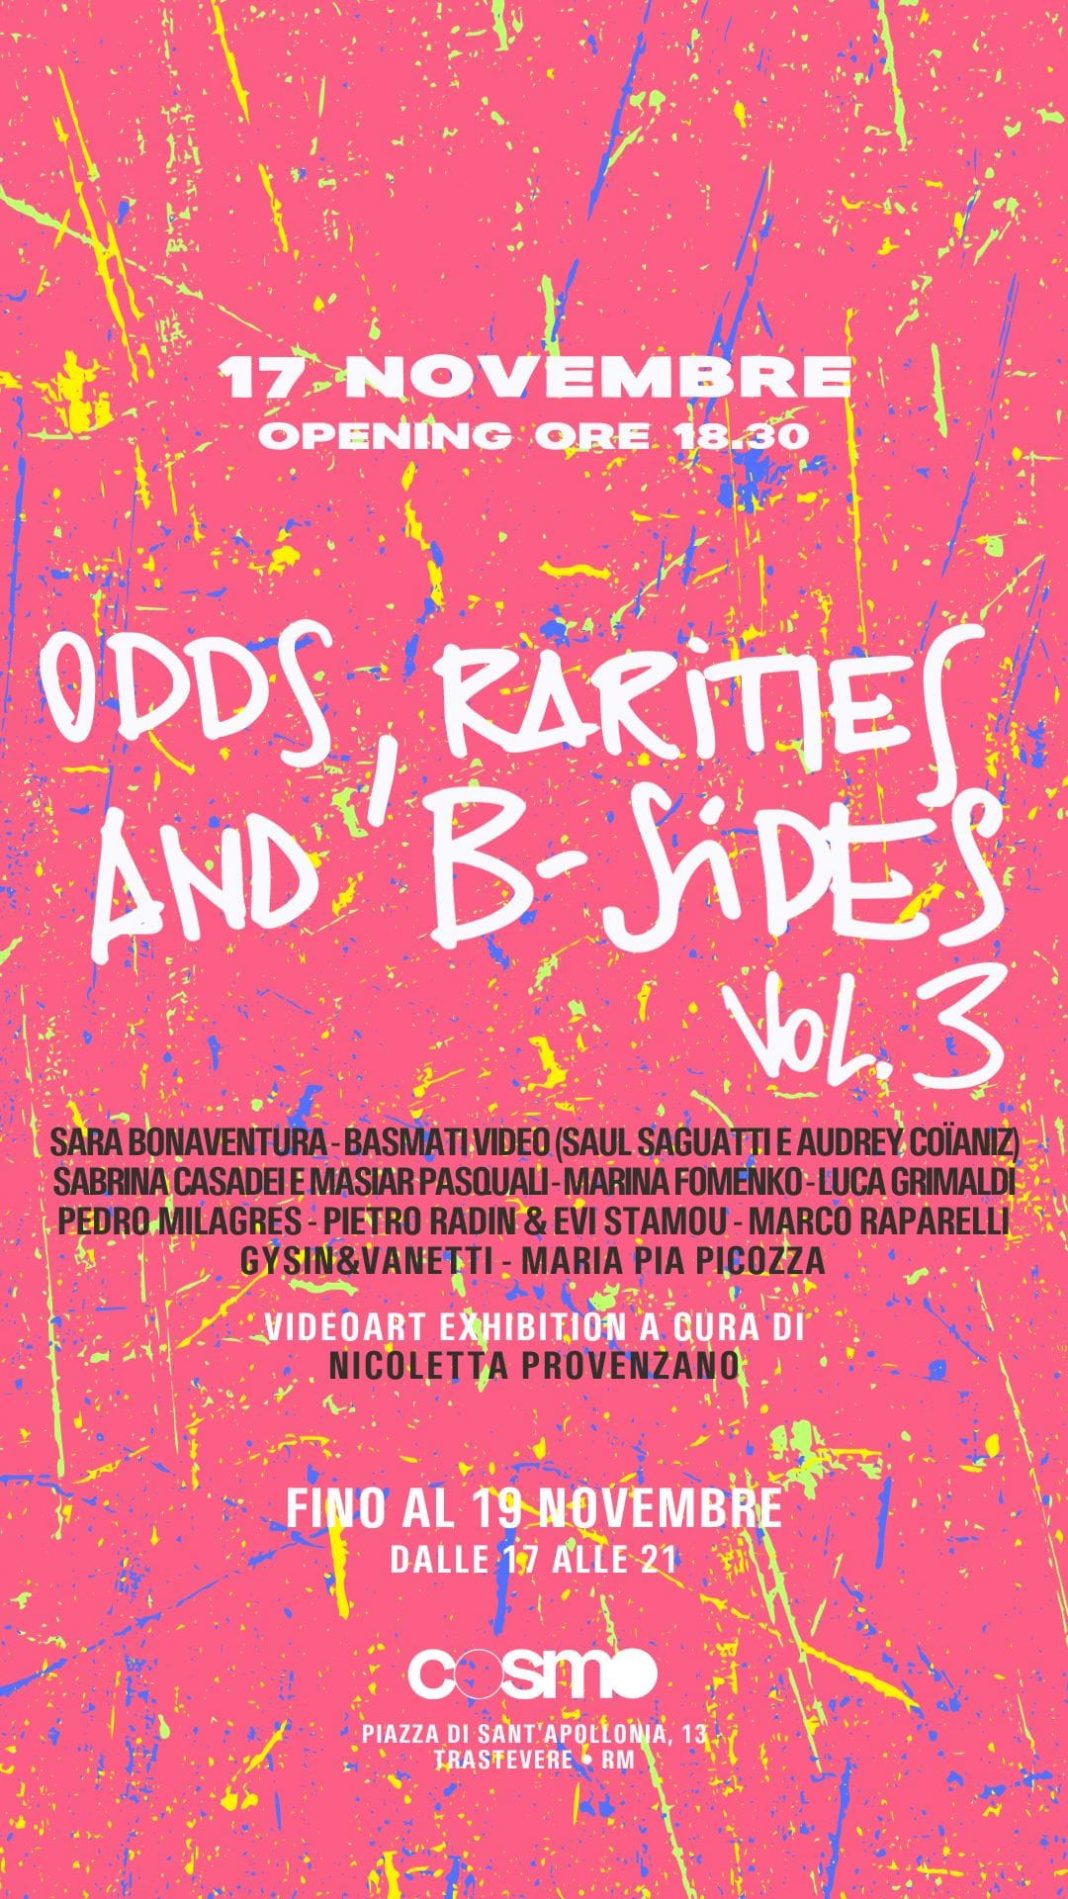 Odds, rarities and B-sides Vol.3https://www.exibart.com/repository/media/formidable/11/img/c3e/Locandina-Odds-rarities-and-B-sides_indirizzo-1068x1899.jpeg